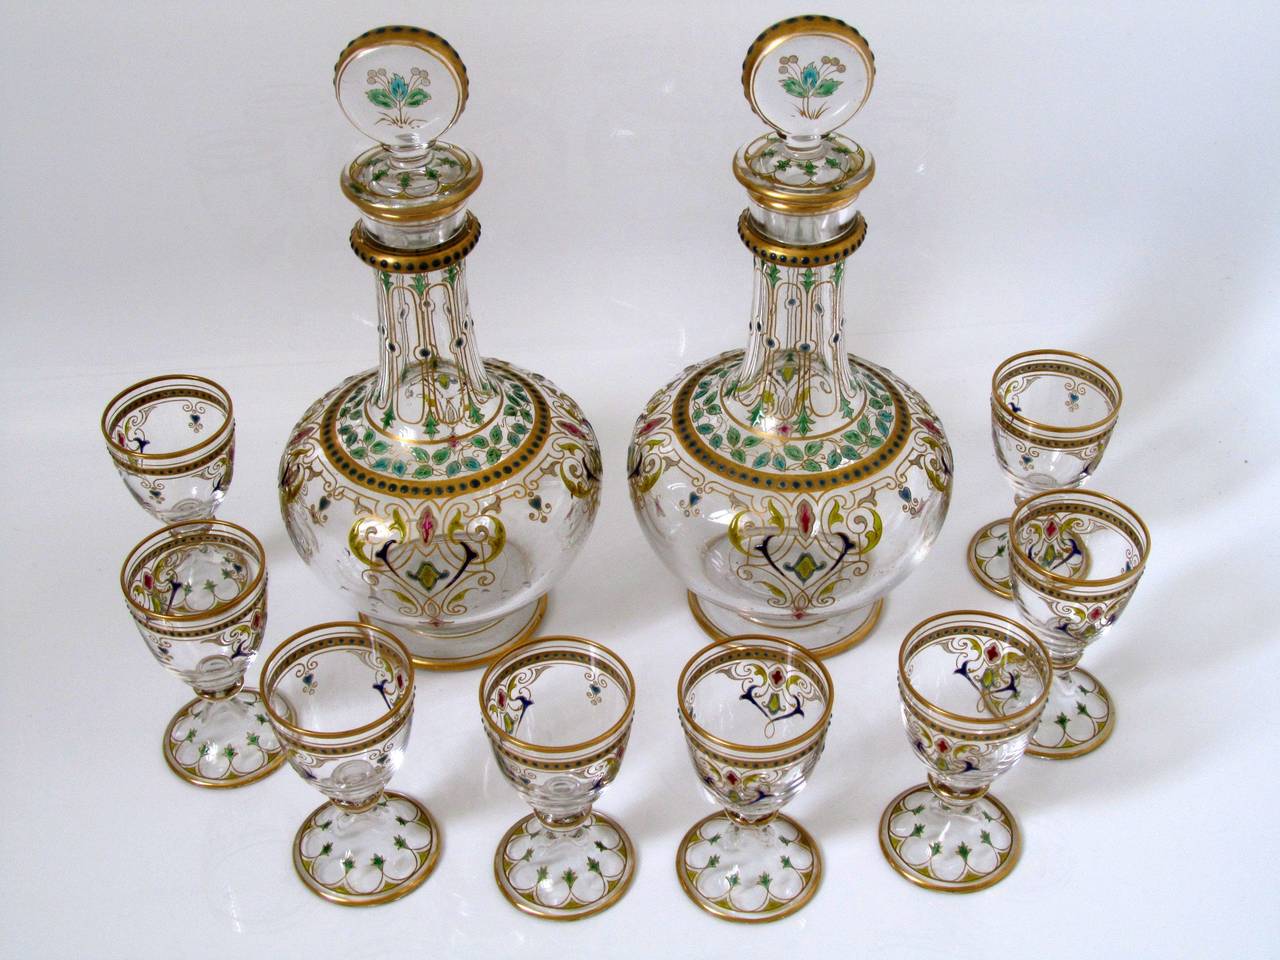 1870s Exceptional French Baccarat Enameled Crystal Liquor Service 4